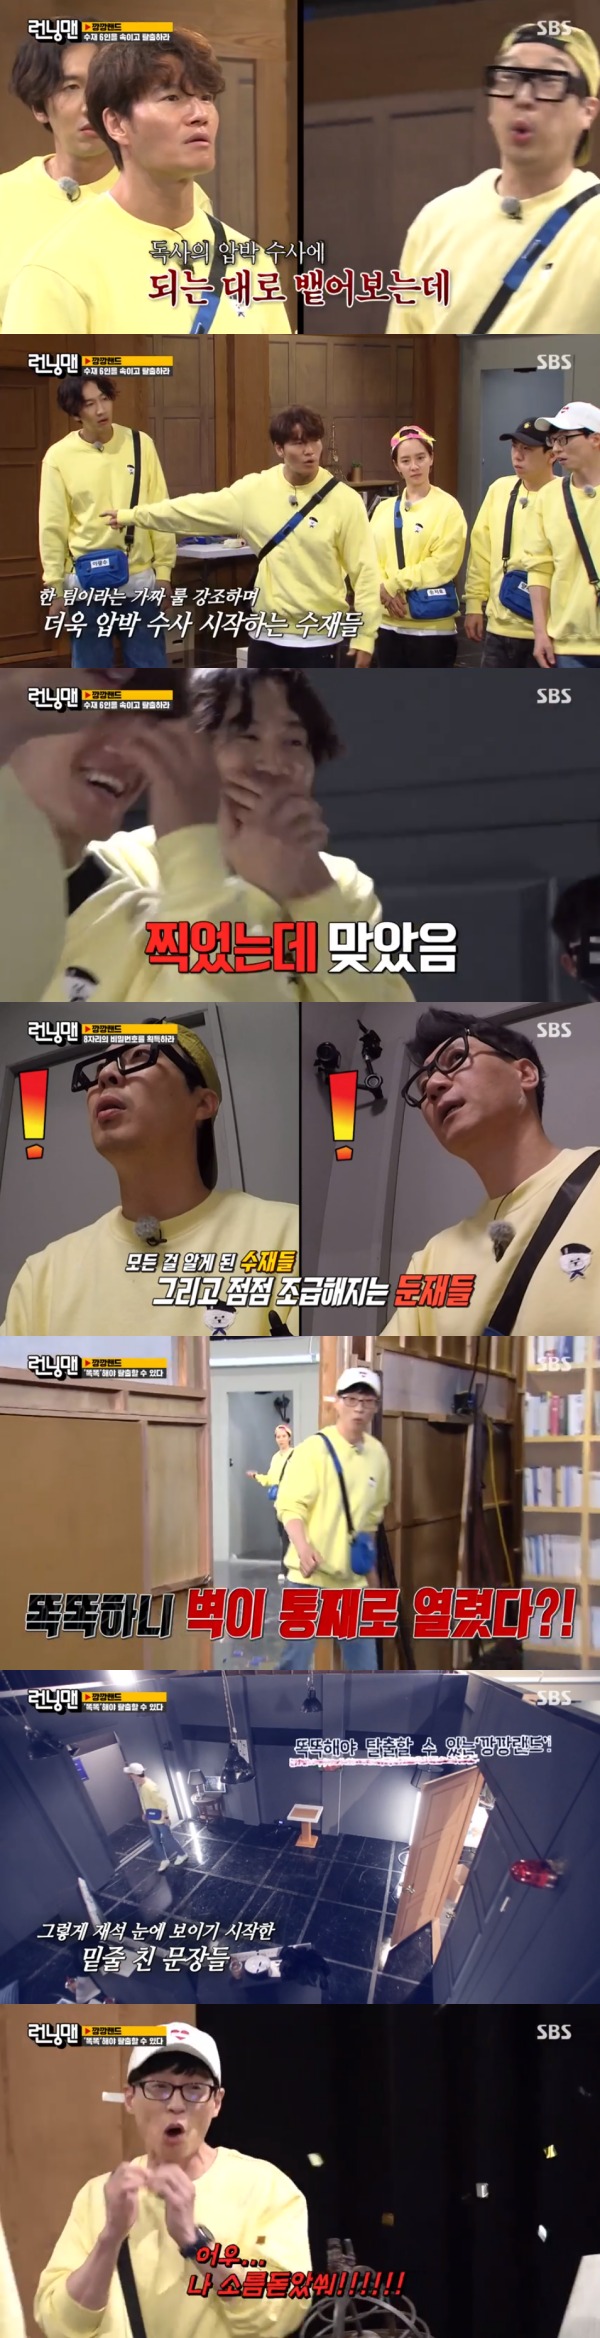 Seoul = = Yoo Jae-Suk played as Susanna Reid in Running Man Susanna Reid.On SBS Running Man broadcasted on the 16th, Kangland Race was held to escape from smart.The members shared the team with a quiz on the day: Yoo Jae-Suk scored the right answer steadily, and Yoo Jae-Suk was the first to escape with 105 points.Kim Jong-kook was in second place, Song Ji-hyo was in third; followed by Lee Kwang-soo and Jeon So-min.Yang Se-chan managed to pass sixth, which Yang Se-chan was ashamed to say was no such disgrace; it turned out there were rules that only served the sixth.Ji Suk-jin and Haha became the official Running Man dunes; six Susanna Reids had to trick Ji Suk-jin and Haha into escaping.Ji Suk-jin, Haha failed to get the problem in time and eventually came out without filling 100 points.The second test was a brain health test: seeing the exceptionally slow and squirming Ji Suk-jin, the Running Man members worried about their health.Ji Suk-jin excused: Its because I tease you sideways: Lee Kwang-soo made it through in 19 seconds, the first time successful; Haha tried it as if he were raping but failed.Kim Jong-kook, even Jeon So-min, succeeded; Susanna Reids then entered the No Escape room and Dunjae remained in the main room.Ji Suk-jin was strange about the situation that he was divided into the same team.The Susanna Reid team, who entered the No Escape room, planned to hit only three front seats of the three locks and turn the last number.The first problem was wrong, but the second and third problems were met and two numbers were found.The Susanna Reid team, which entered the No Escape room for the second time, succeeded in opening the second lock.The Susanna Reid team, which entered the No Escape room for the third time, doubted the blunt-handed team.Ji Suk-jin and Haha did not do the mission with only a loud sound of pretending to do the mission; it turned out that the Dunjae team knew the Susanna Reid team and other hidden rules.While Susanna Reids team solved the problem in the No Escape room, Dunja team had to open the door of a real escape and escape; the passwords could be obtained one by one in eight solitary rooms.Kim Jong-kook conducted a pressure investigation against Ji Suk-jin and Haha but found nothing.Finally, the No Escape room opened; the Susanna Reid team quickly tried to get the password, and the Dunjae team was immersed in a hidden quiz.The Dunjae team also rushed to get the password: Susanna Reids team opened the No Escape room door first and found out the real escape.The Dunjae team was embarrassed to see the Susanna Reid team from the No Escape room; the Susanna Reid team quickly caught up with the Dunjae team.At this point, Yoo Jae-Suk read several instructions and smart and knocked on the wall with the door lock, which opened the wall.Eventually Game ended with a victory for the Susanna Reid team, which Yoo Jae-Suk belonged to.